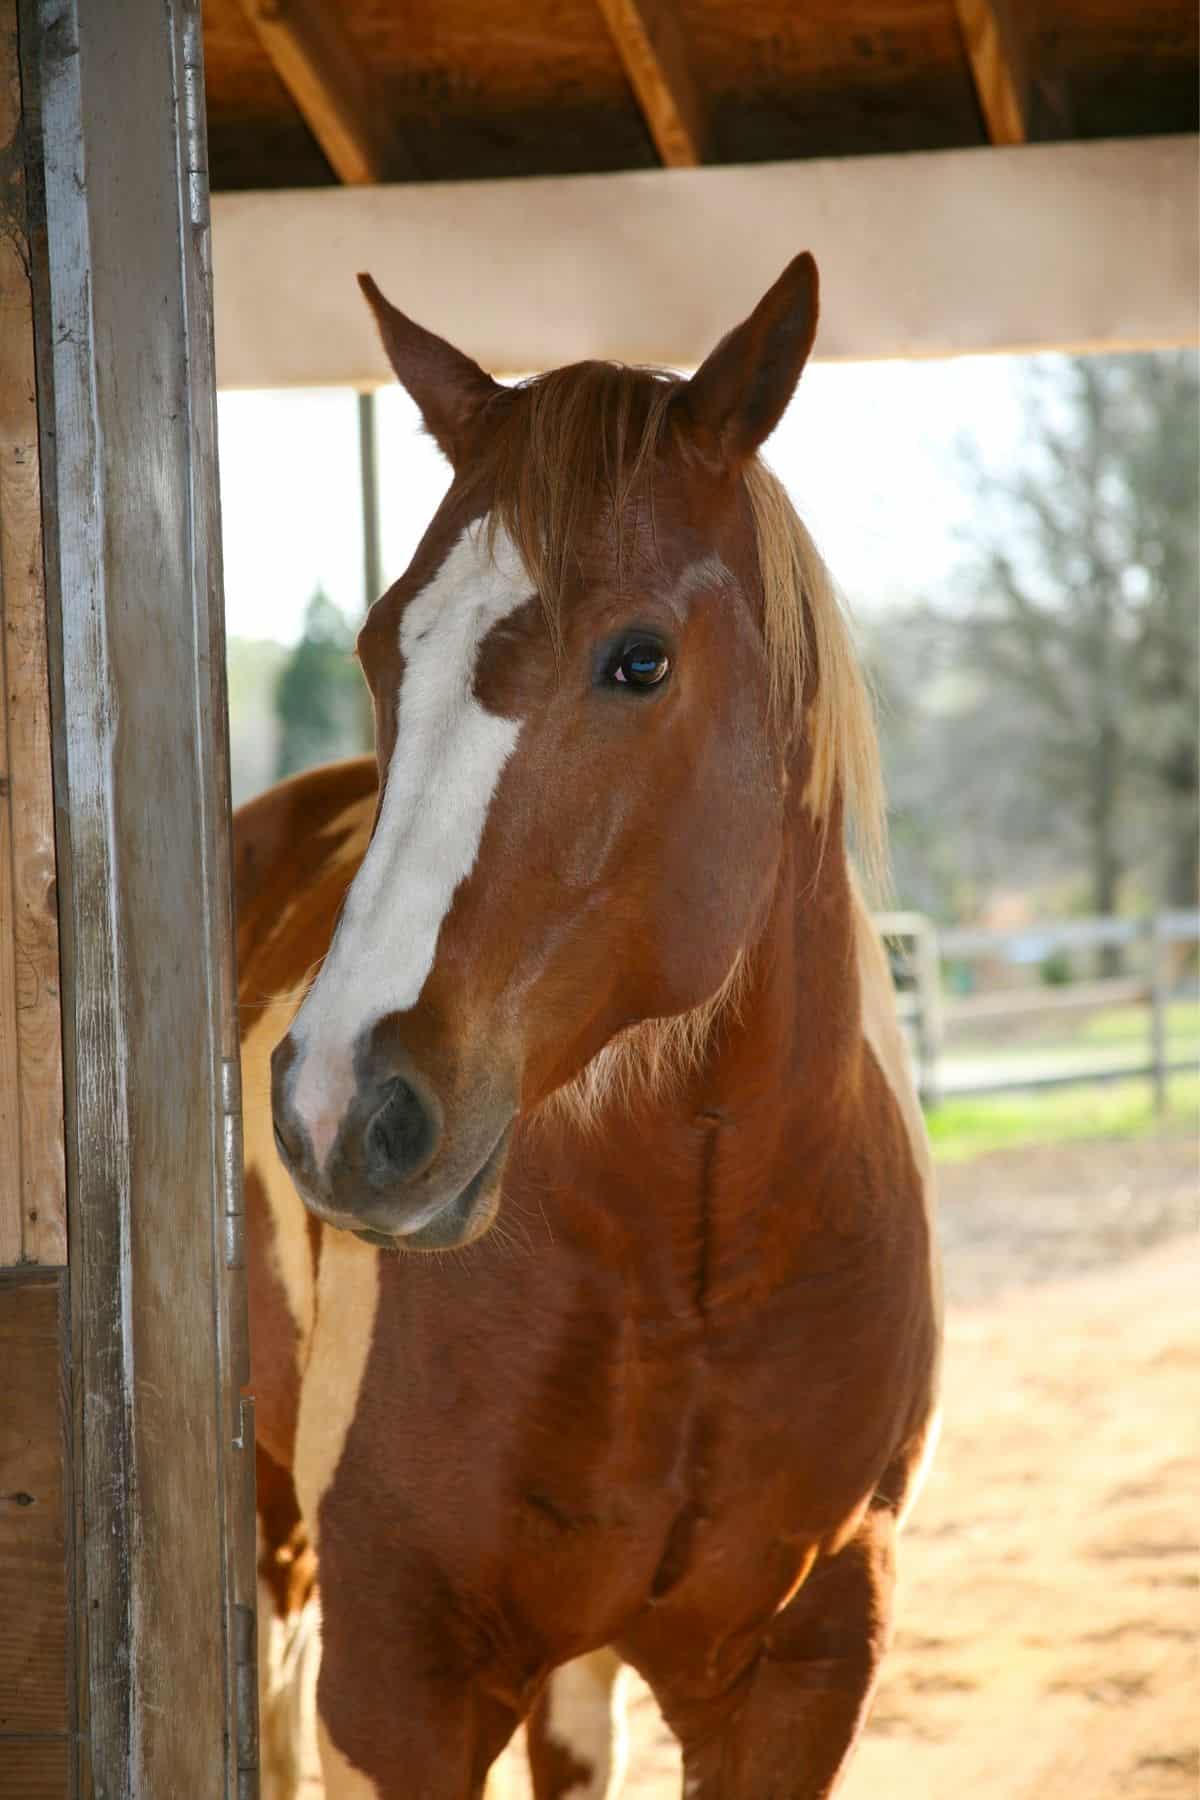 Brown horse with white markings in barn